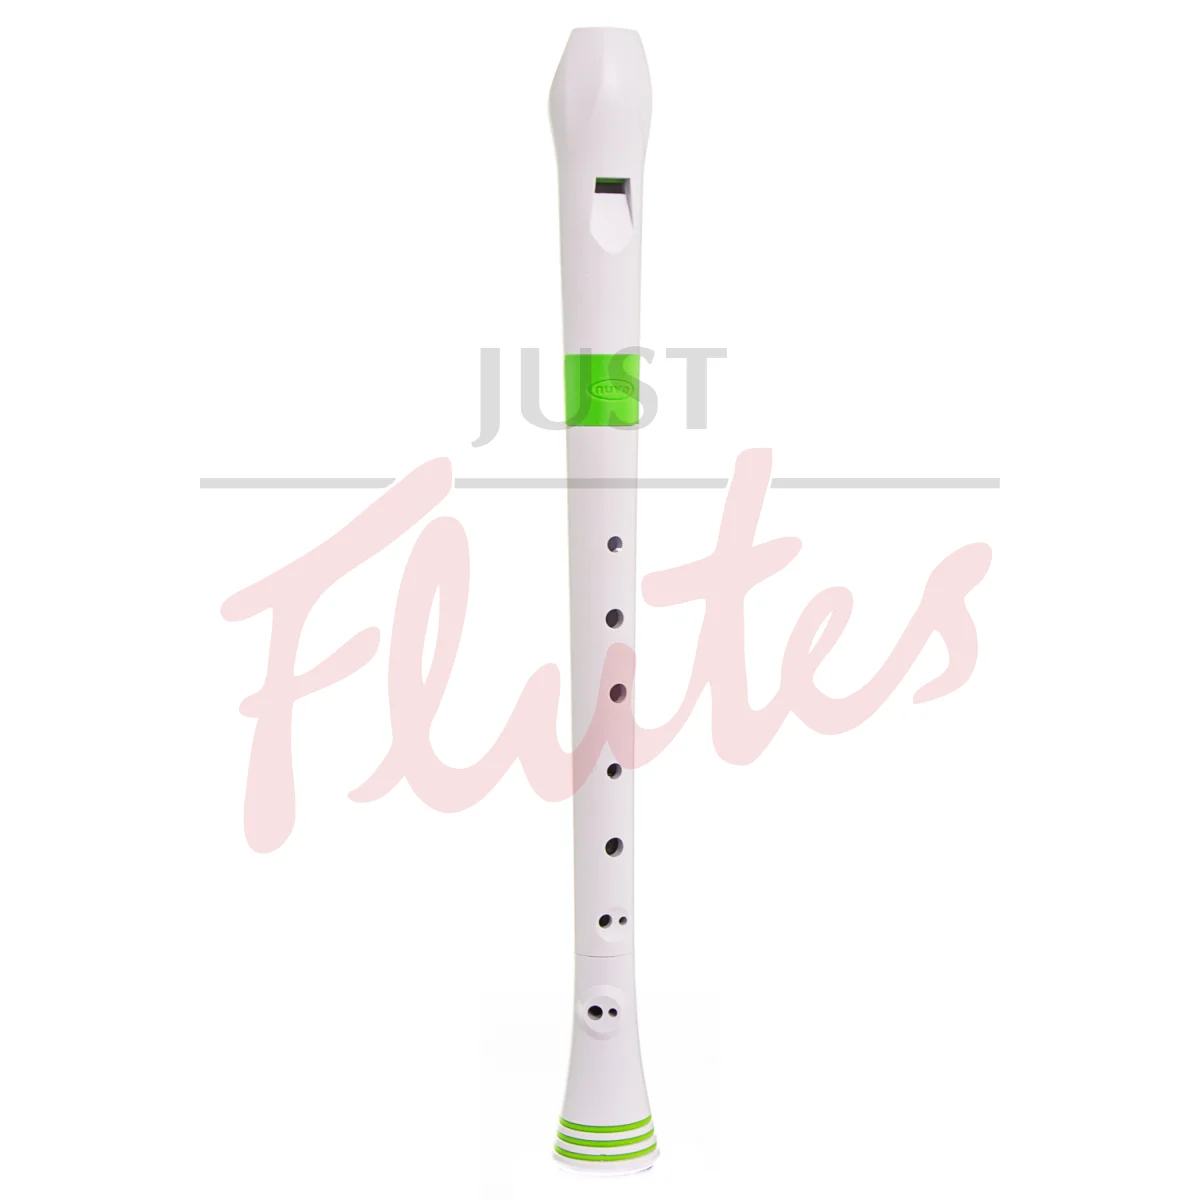 Nuvo N310RDGR Recorder, White with Green Trim